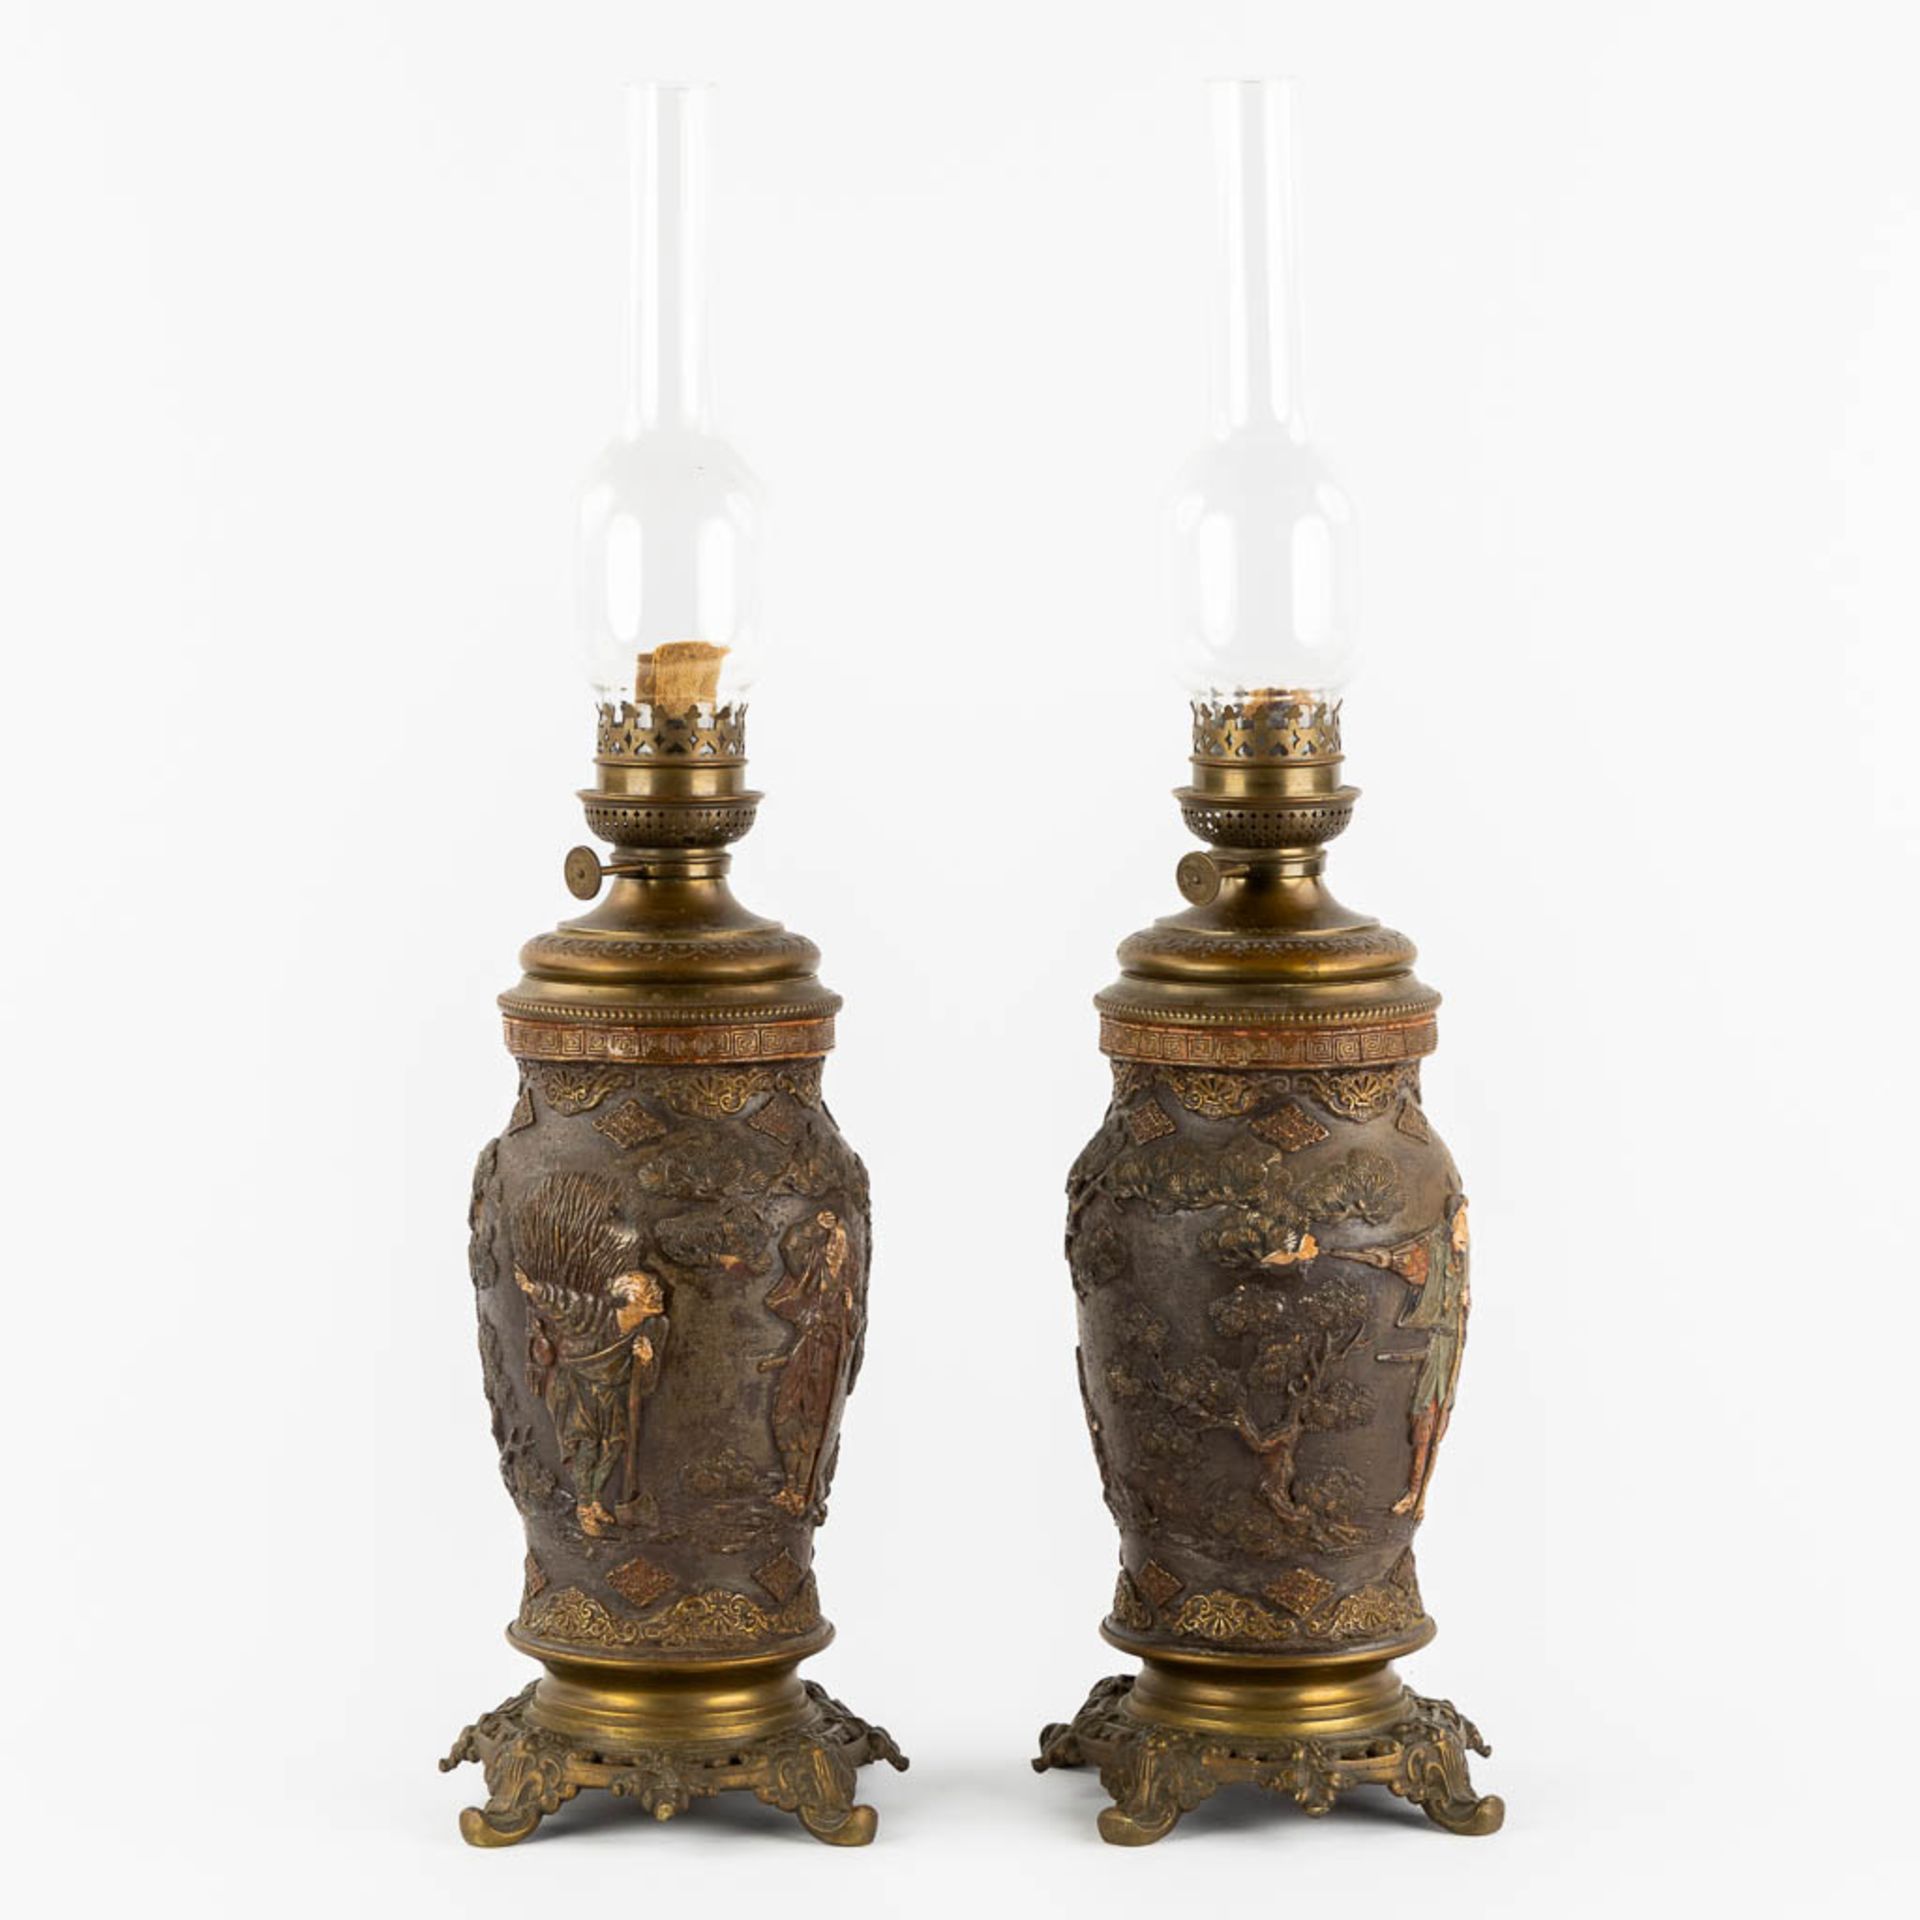 An Oriental pair of oil lamps, terracotta mounted with bronze. Circa 1900. (H:66 x D:18 cm) - Image 3 of 17